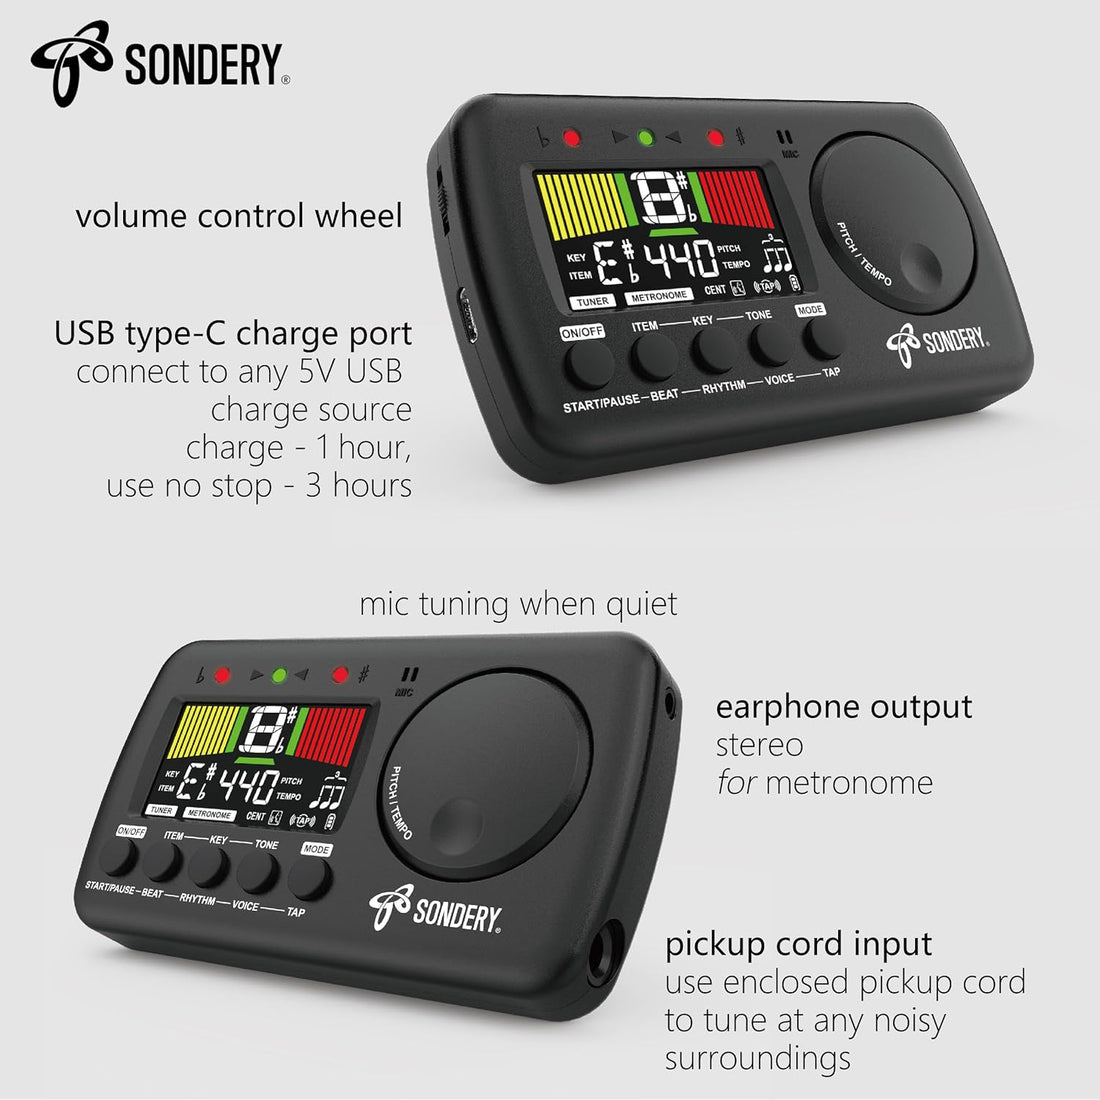 Sondery Metronome Tuner Tone Generator with Guitar, Bass, Ukulele, Chromatic Tuning Modes and 12 Keys Tuning for Wind Instruments, Woman Voice Metronome with Tap Tempo Setting, Power Rechargeable